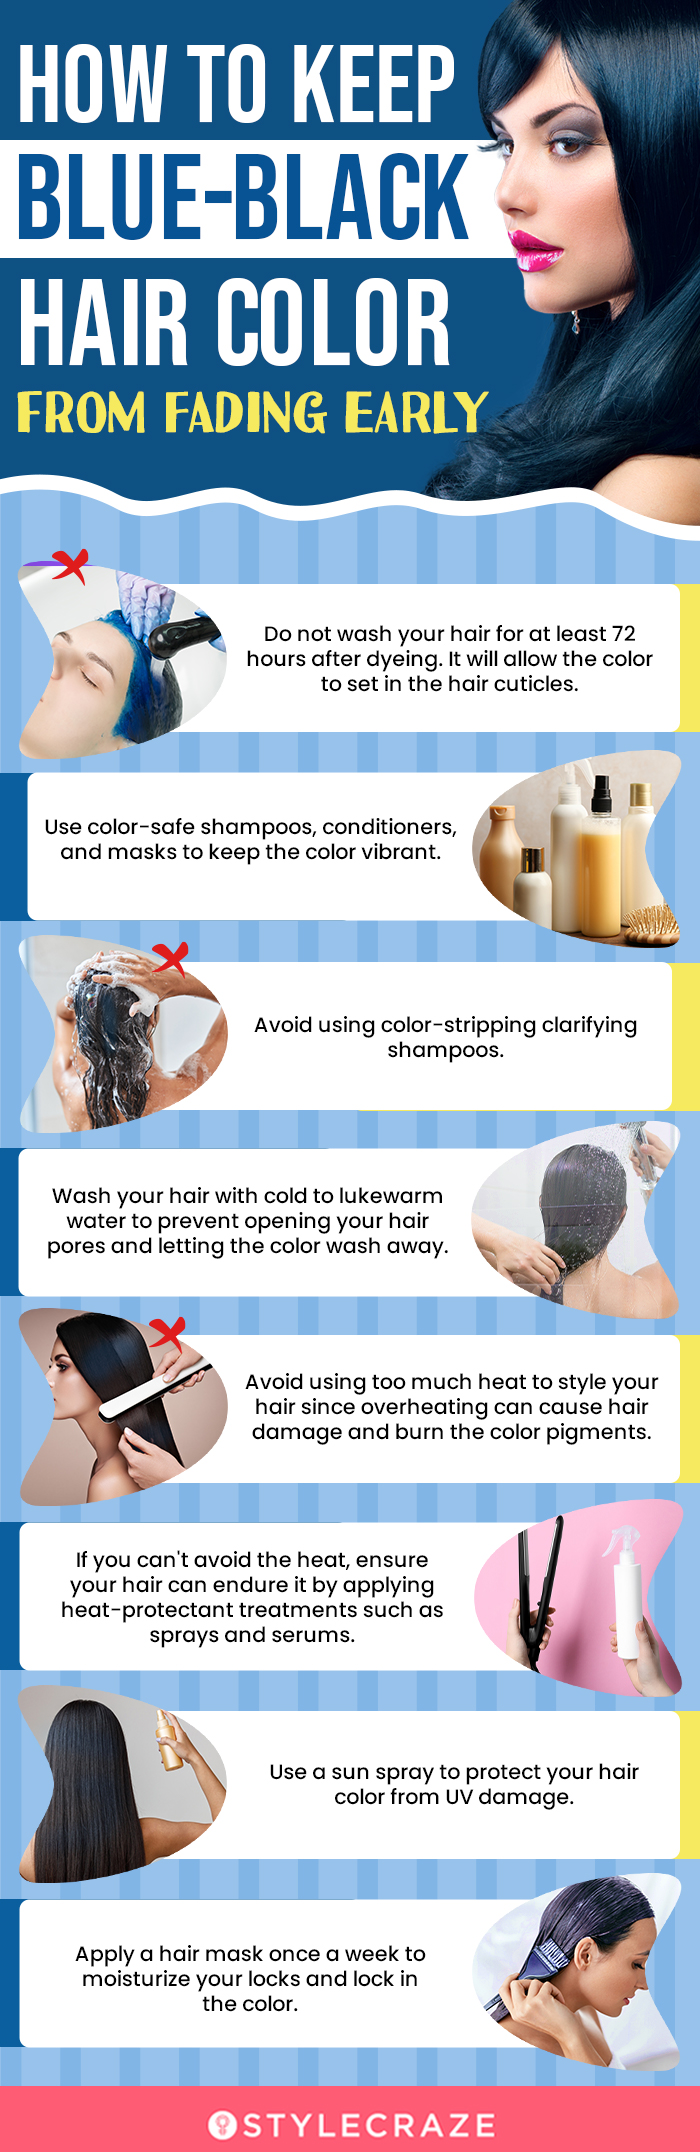 How To Keep Blue-Black Hair Color From Fading Early (infographic)